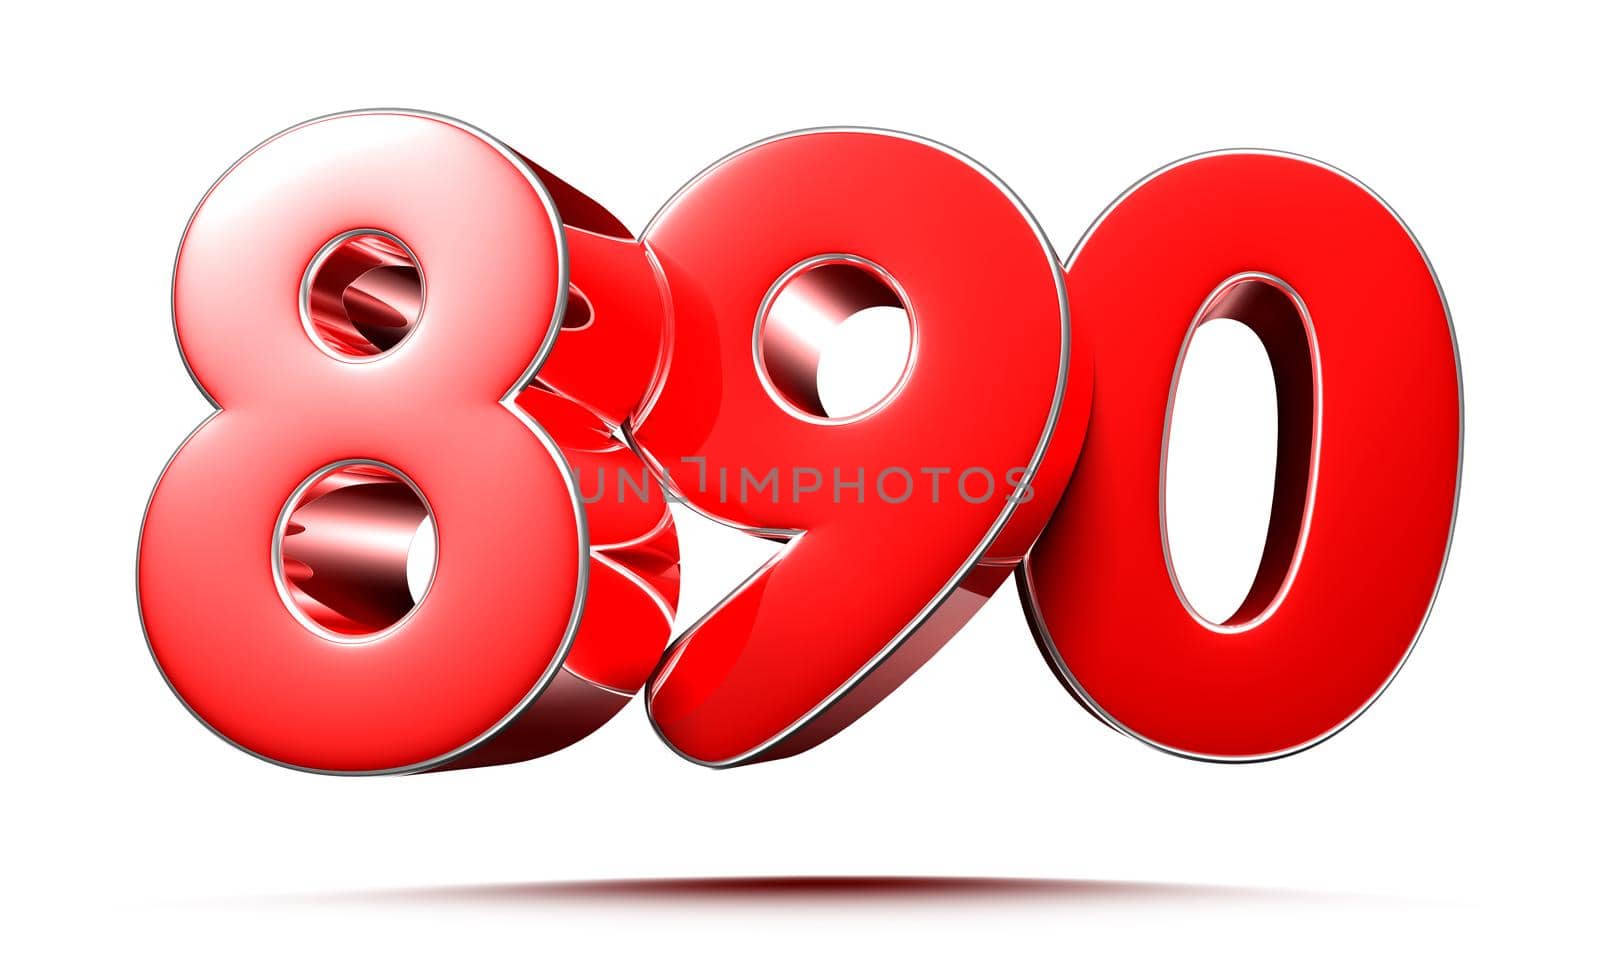 Rounded red numbers 890 on white background 3D illustration with clipping path